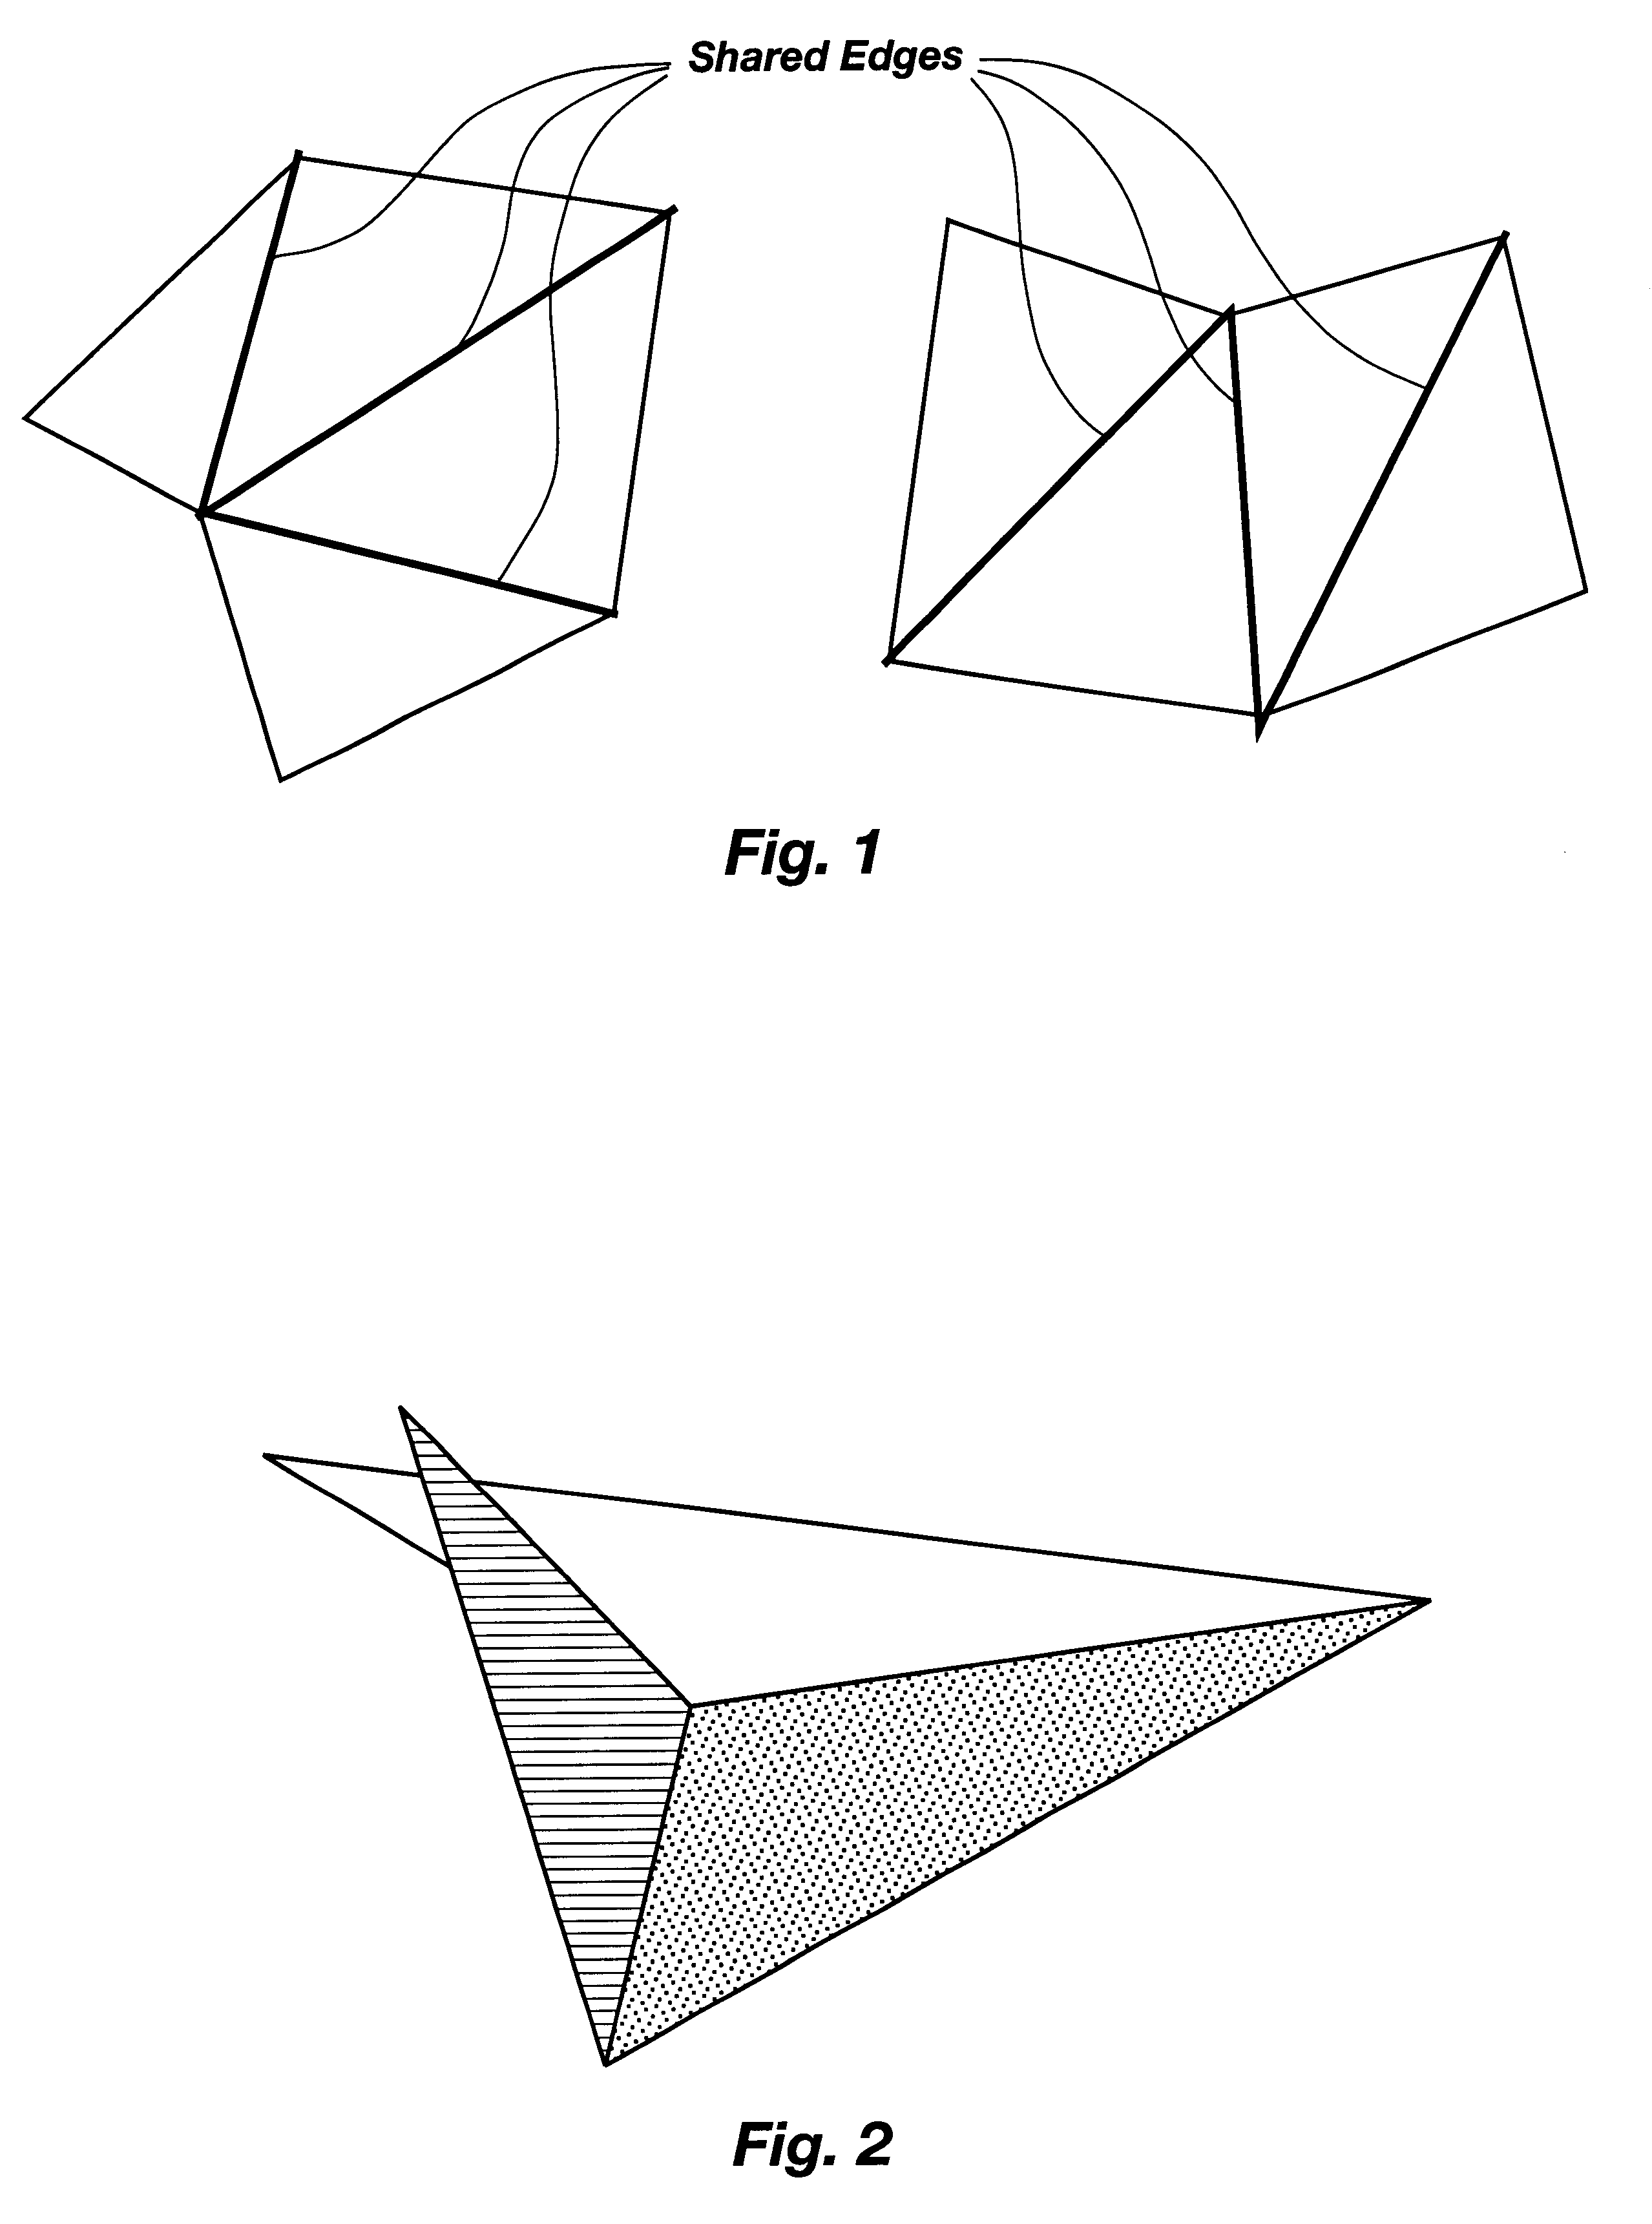 System and method for reducing the rendering load for high depth complexity scenes on a computer graphics display